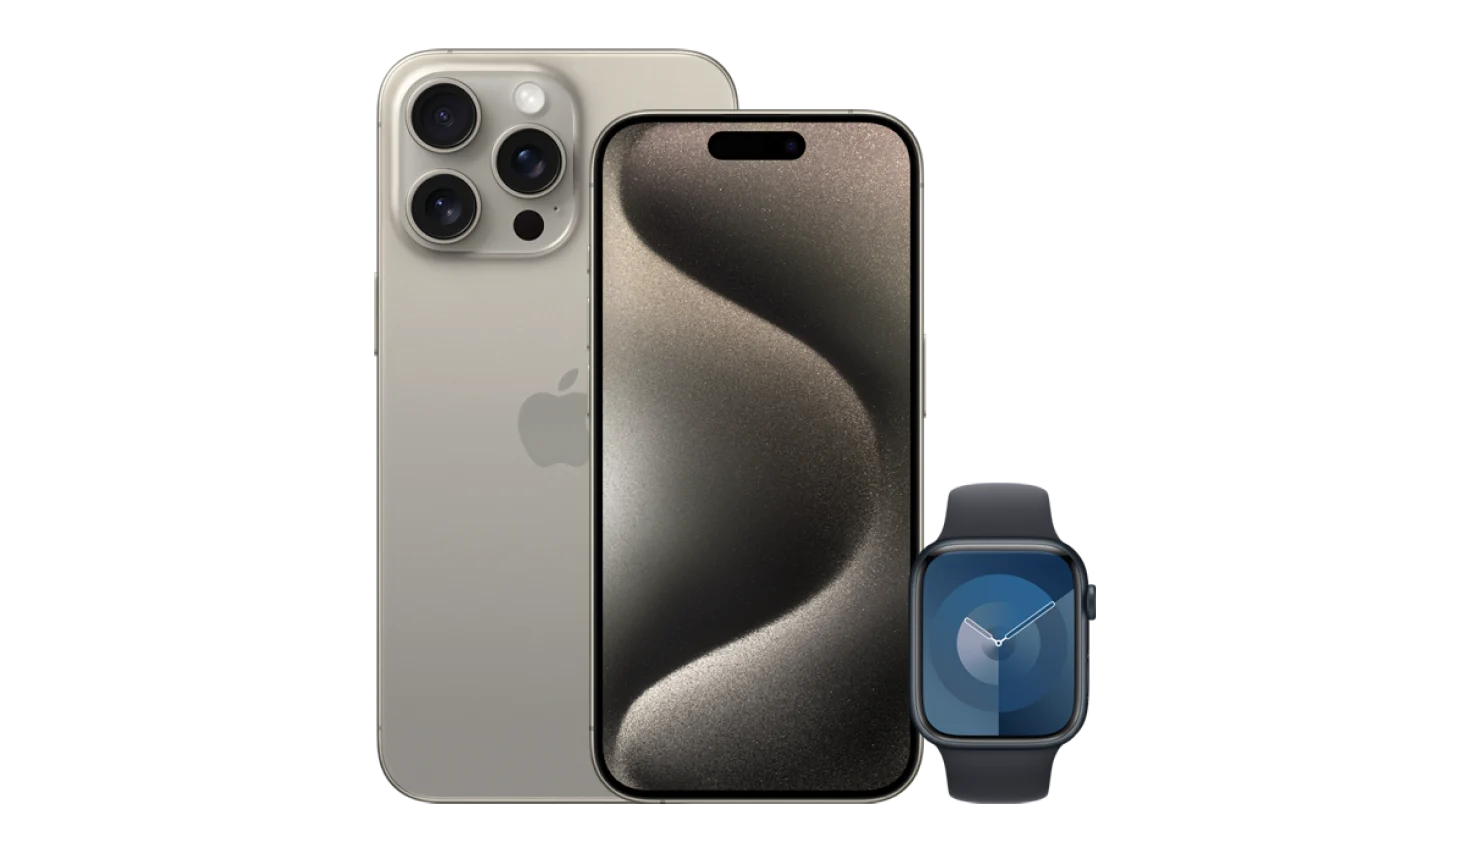 The iPhone 15 Pro Max in Natural Titanium is shown alongside the Apple Watch Series 9 in a Midnight Aluminium Case with a Midnight Sport Band.